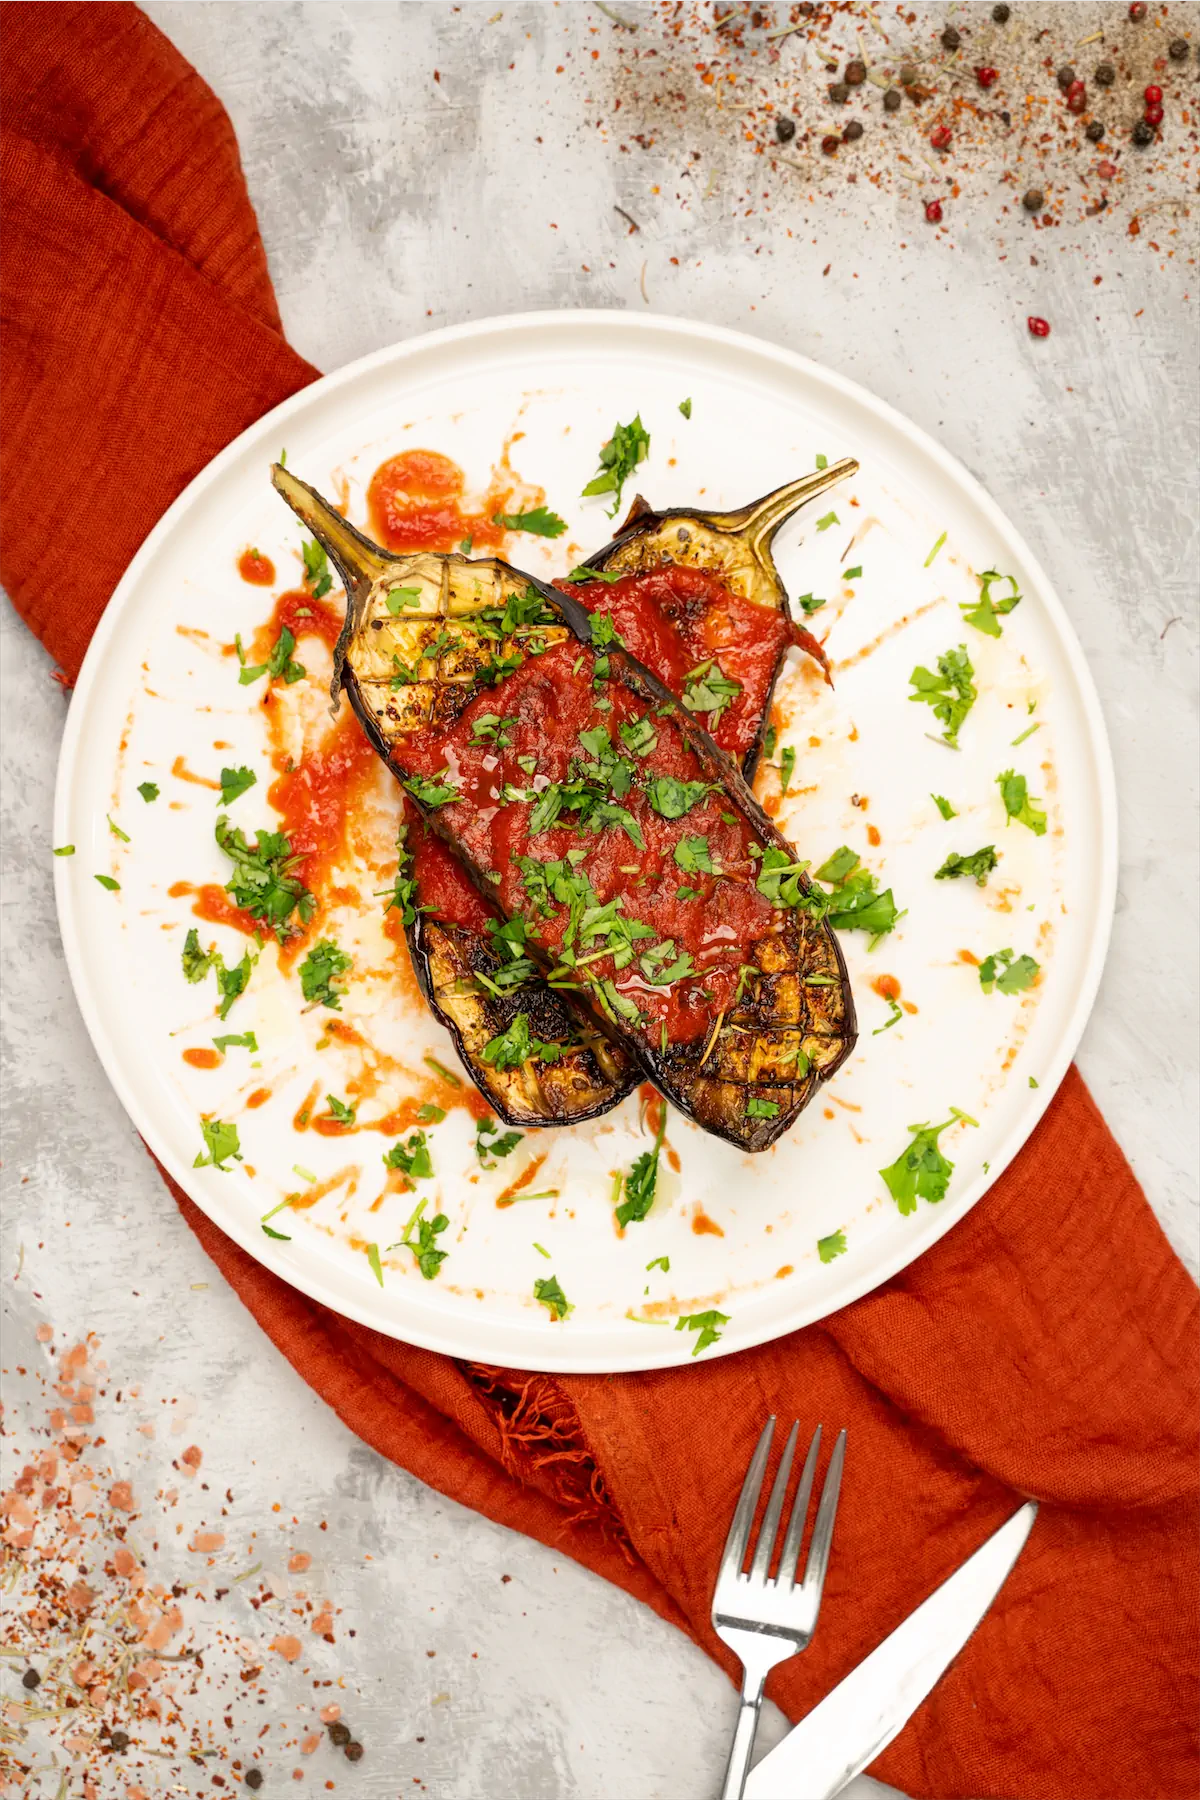 Homemade roasted eggplant recipe served on a plate topped with tomato sauce and chopped coriander leaves.